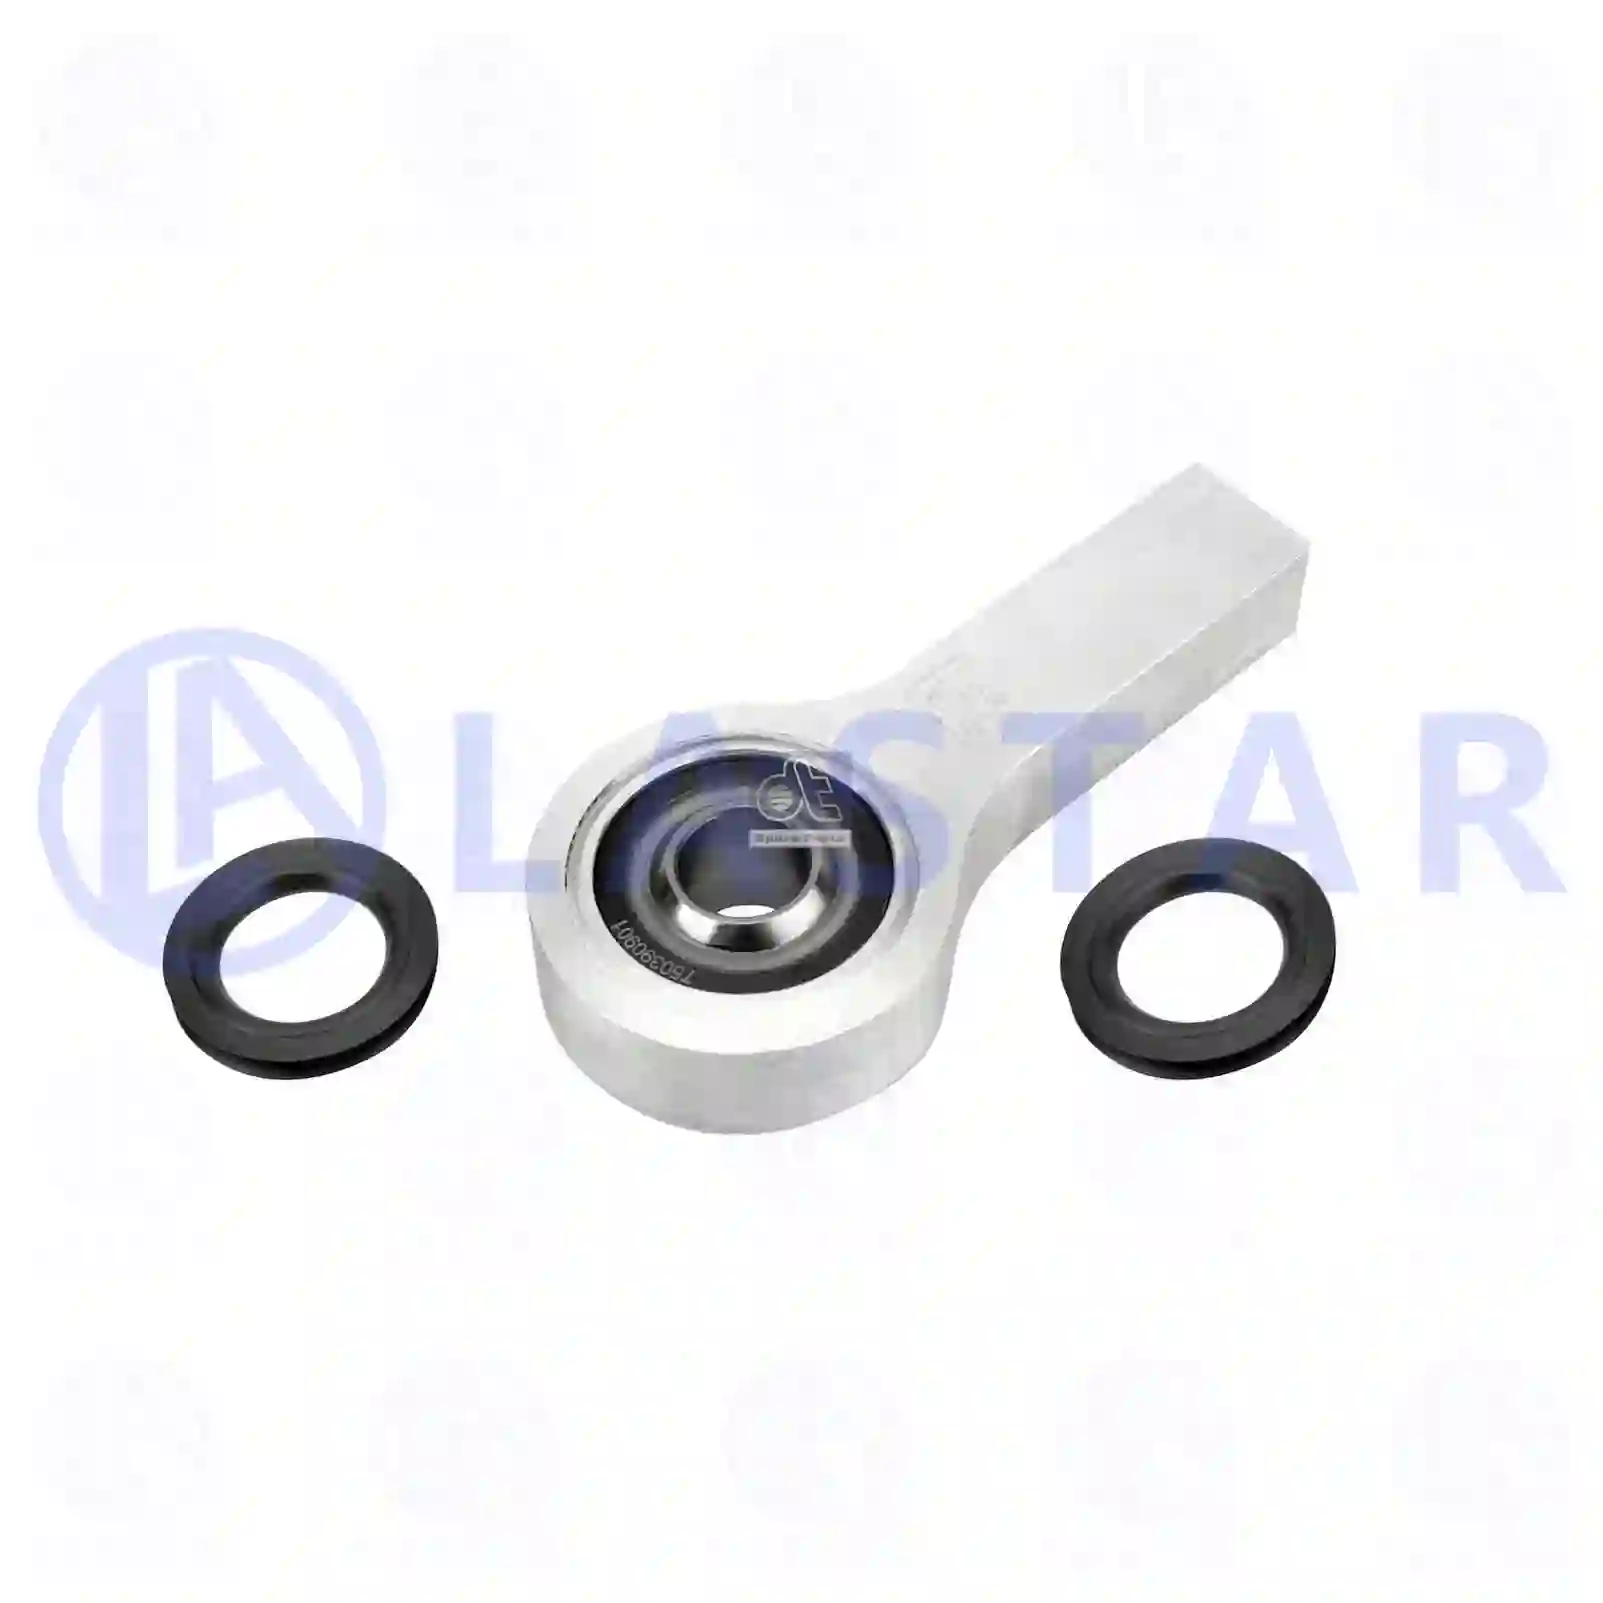 Bearing joint, complete with seal rings, 77735915, 2171713, ZG40856-0008, ||  77735915 Lastar Spare Part | Truck Spare Parts, Auotomotive Spare Parts Bearing joint, complete with seal rings, 77735915, 2171713, ZG40856-0008, ||  77735915 Lastar Spare Part | Truck Spare Parts, Auotomotive Spare Parts